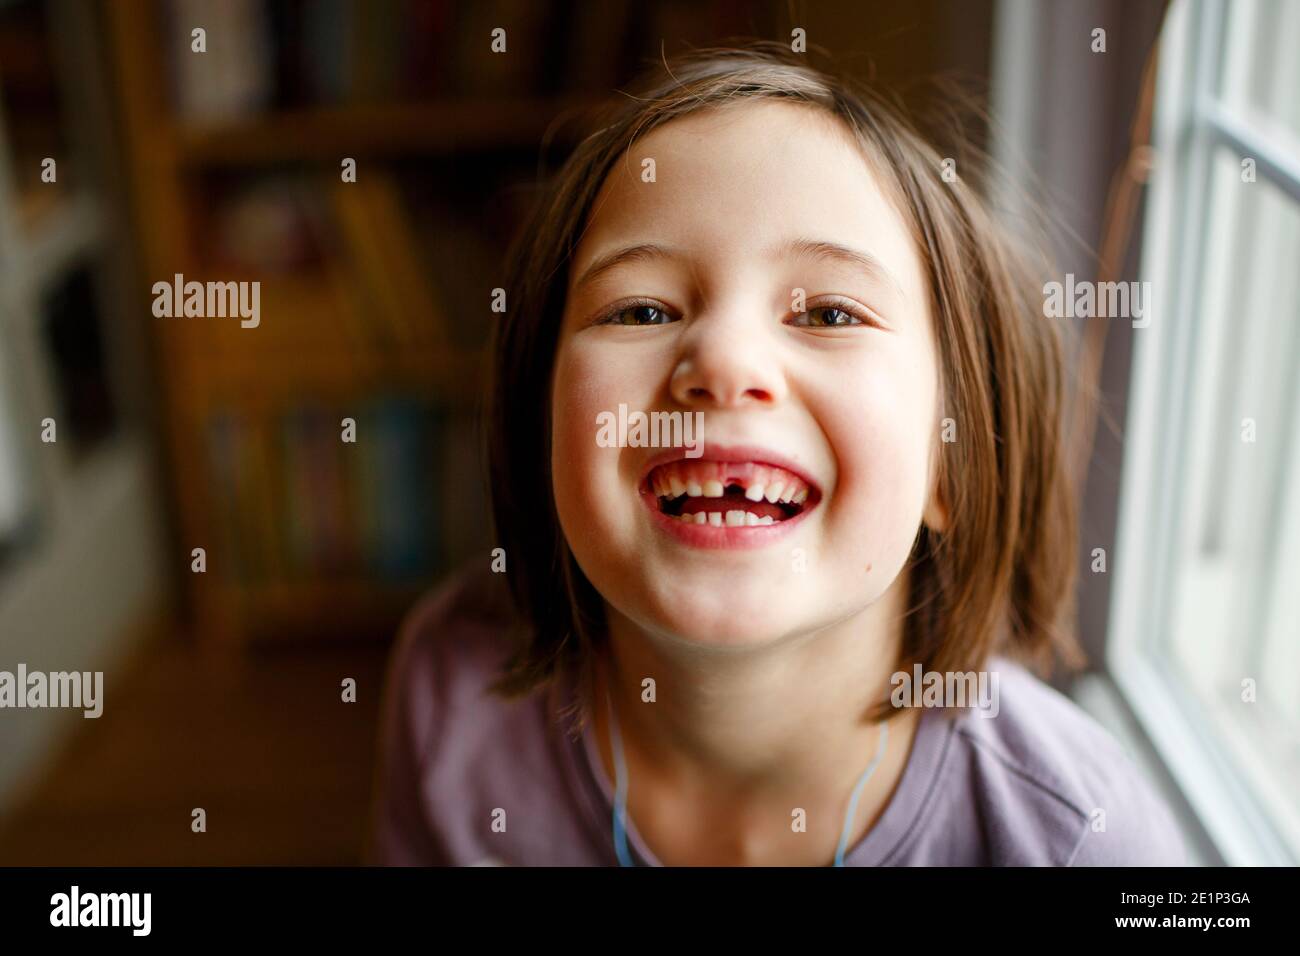 An adorable girl with bright eyes proudly displays a missing tooth Stock Photo